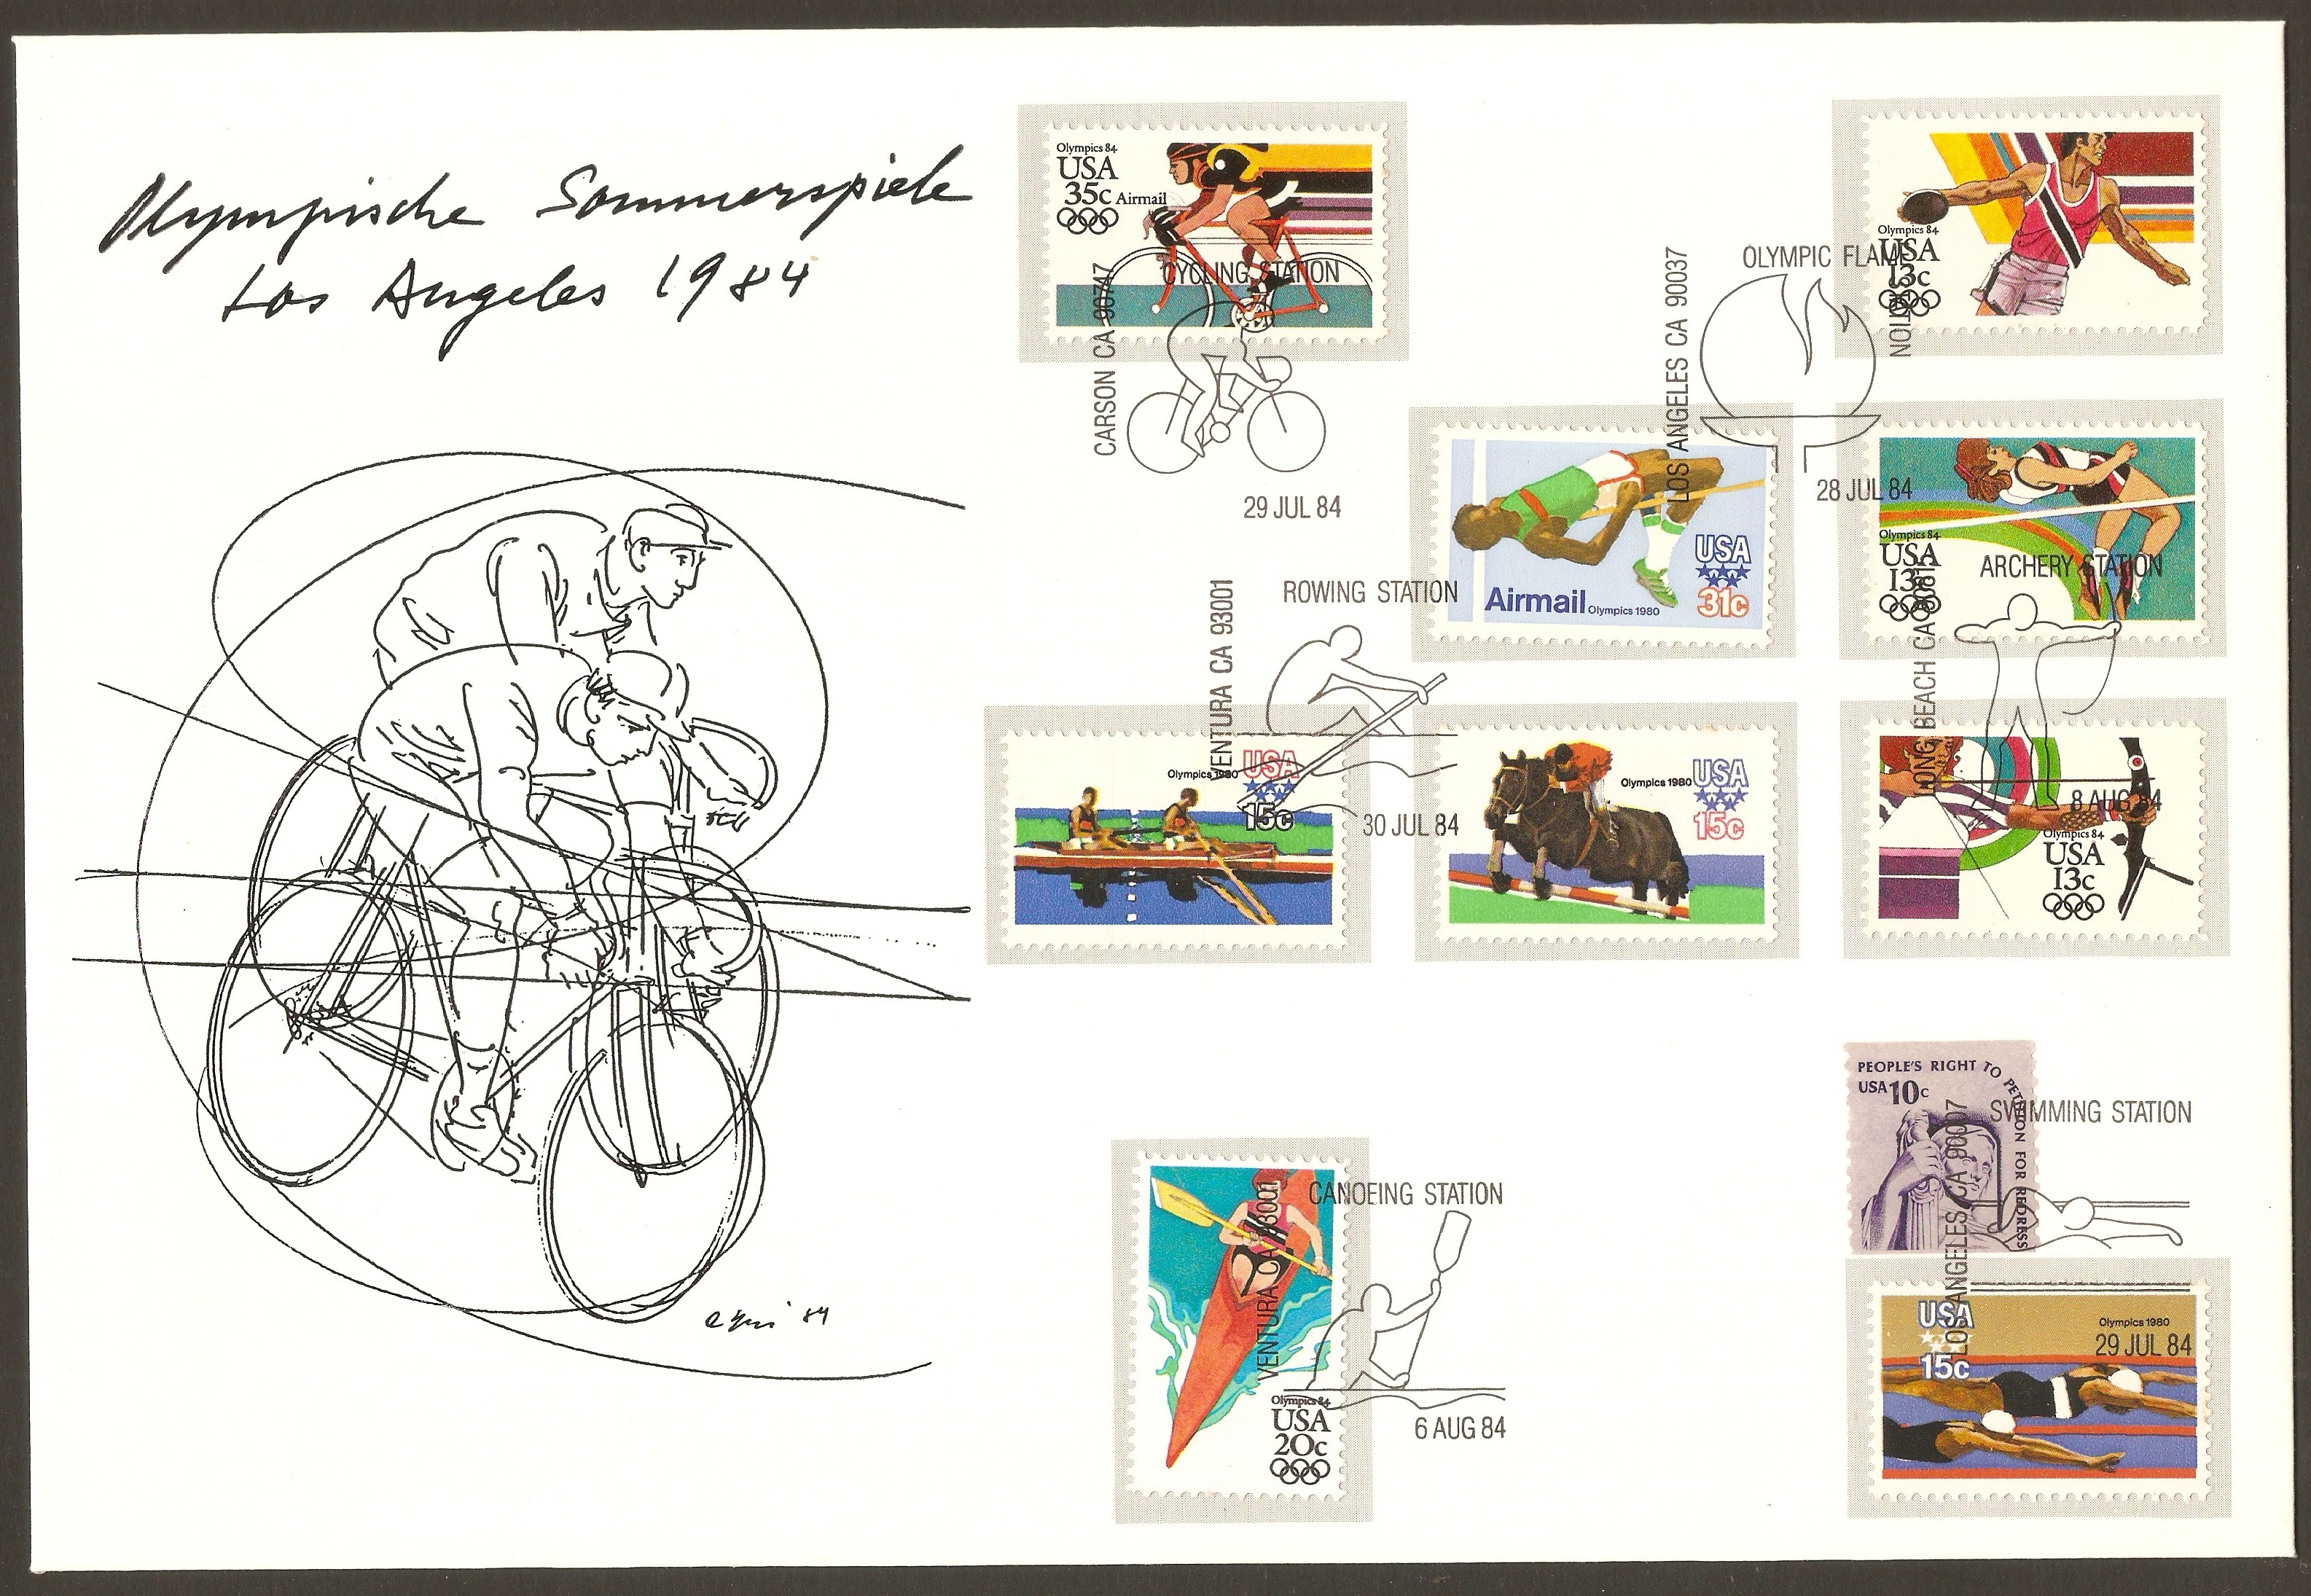 United States 1979 Moscow Olympics Souvenir Cover.